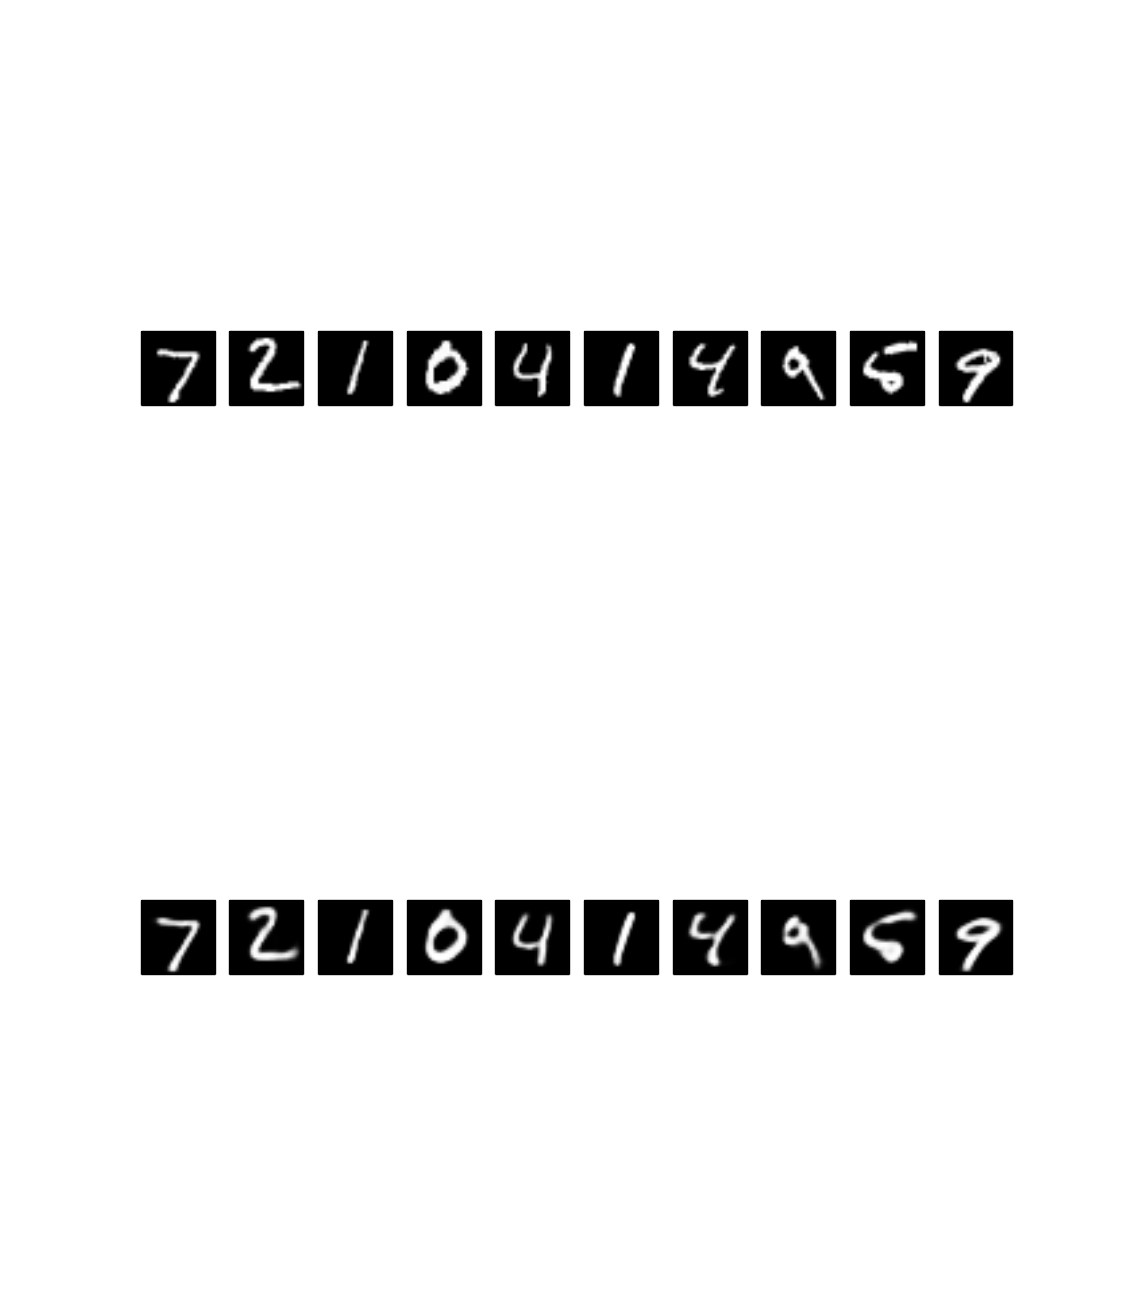 Mnist digits as reconstructed by the autoencoder